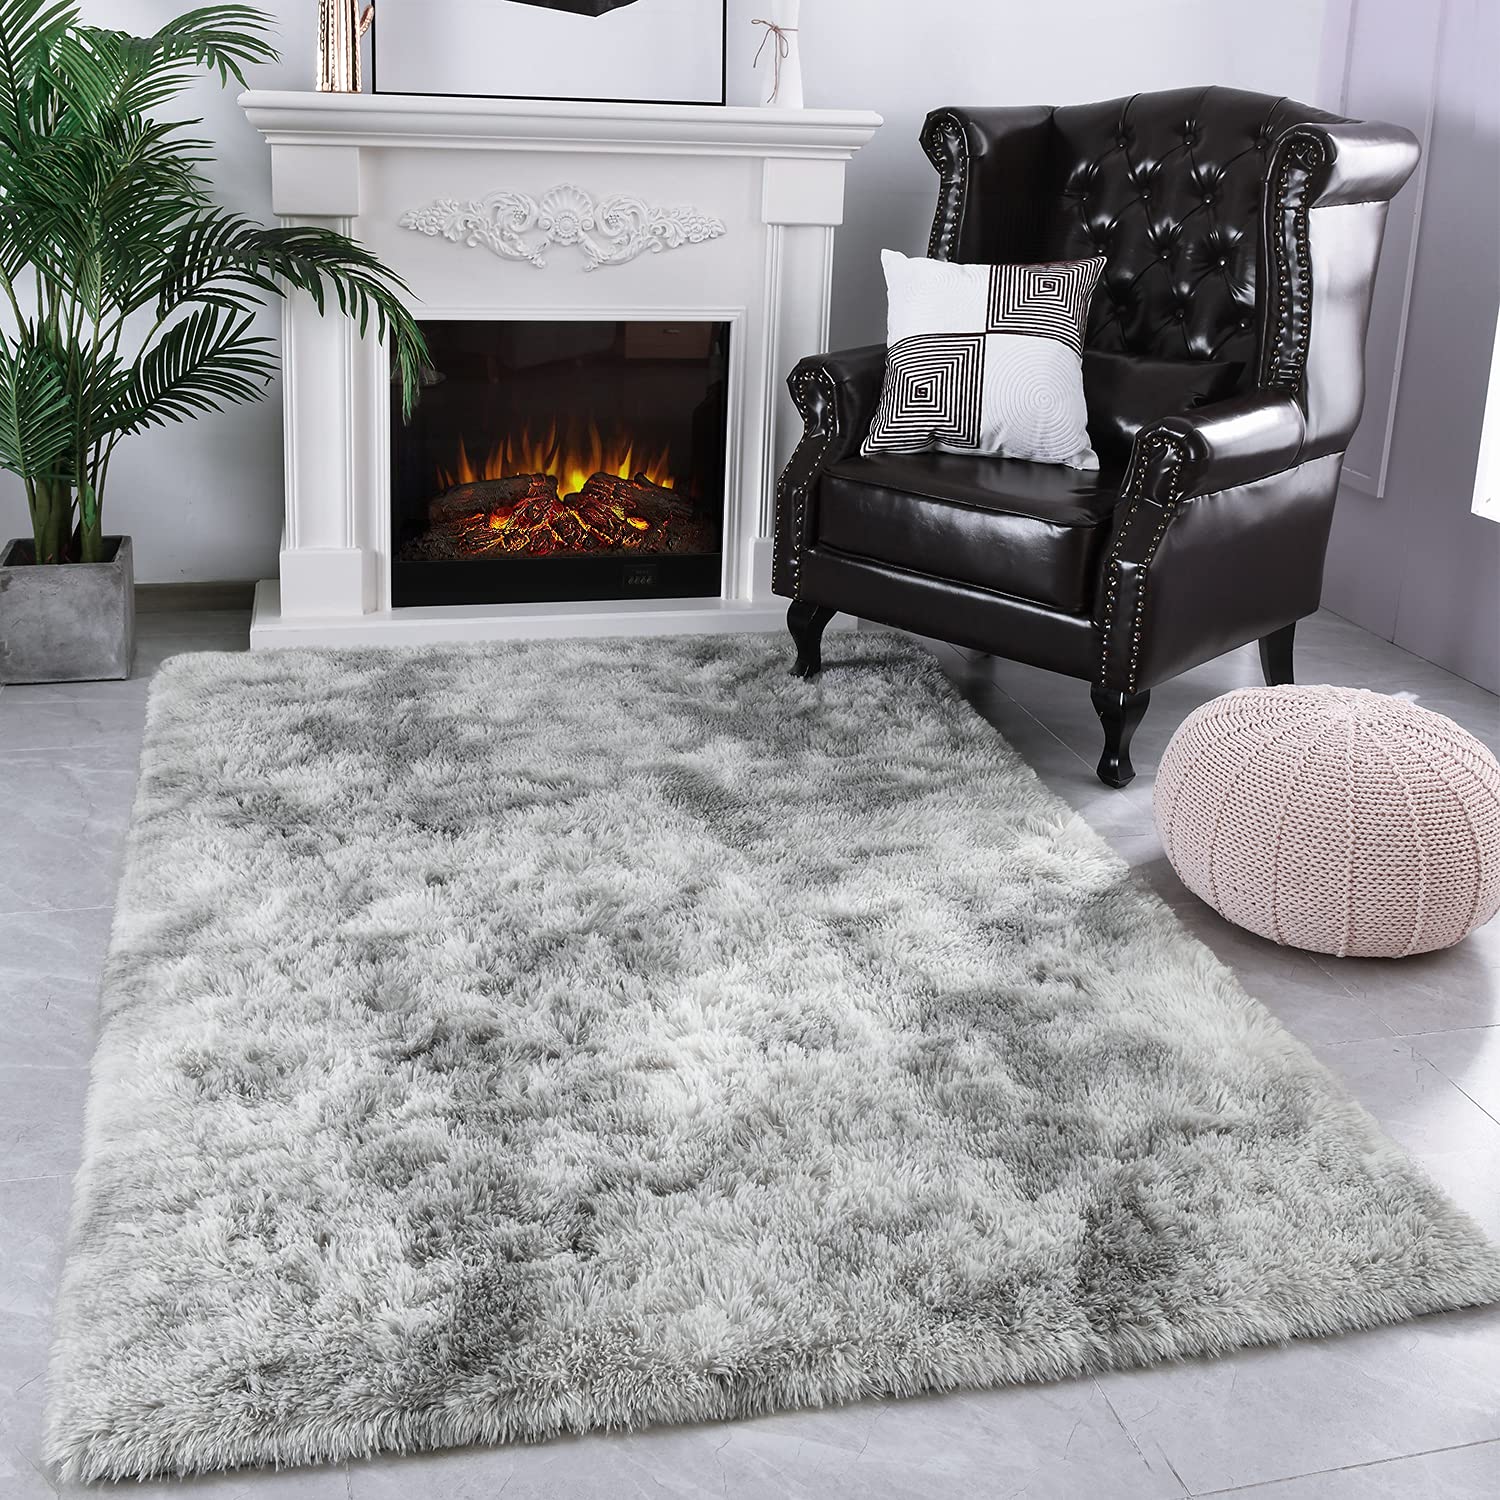 Modern Fluffy Large Area Rugs for Living Room Bedroom, Soft Shaggy Plush Abstract Rug Kids Non-Slip Play Mats, Fuzzy Floor Carpets for Girls Room D...